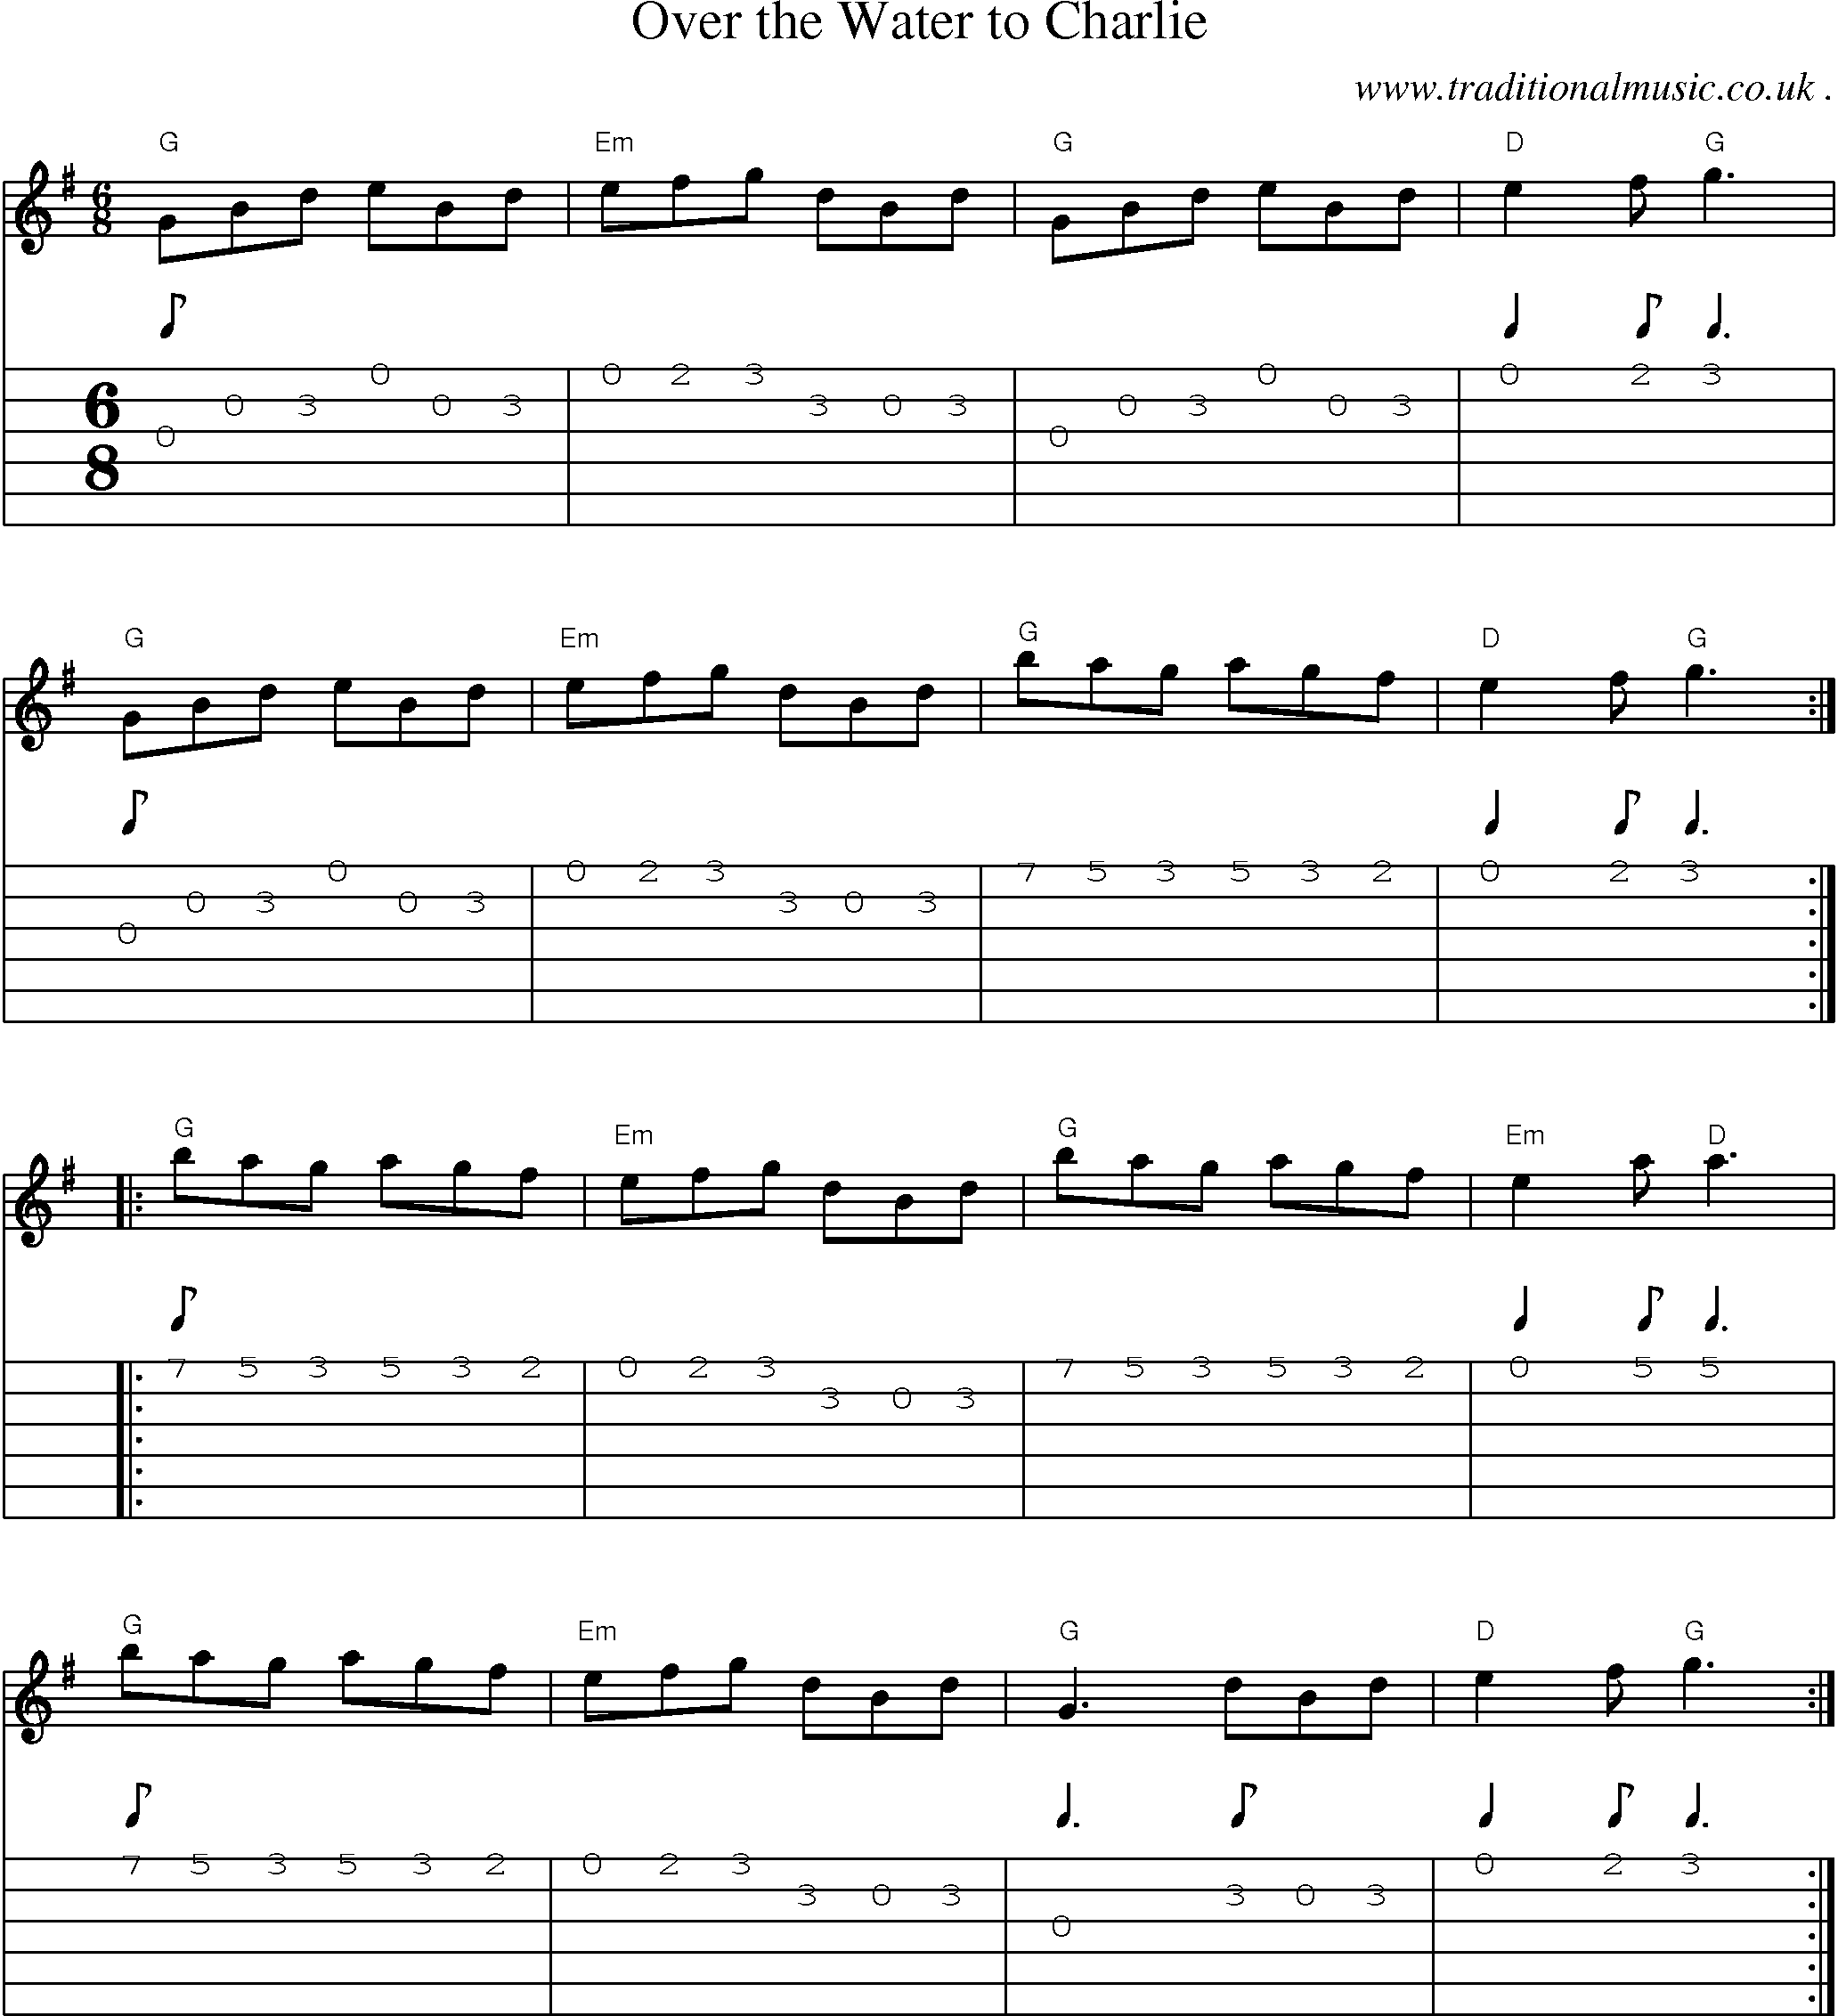 Music Score and Guitar Tabs for Over the Water to Charlie